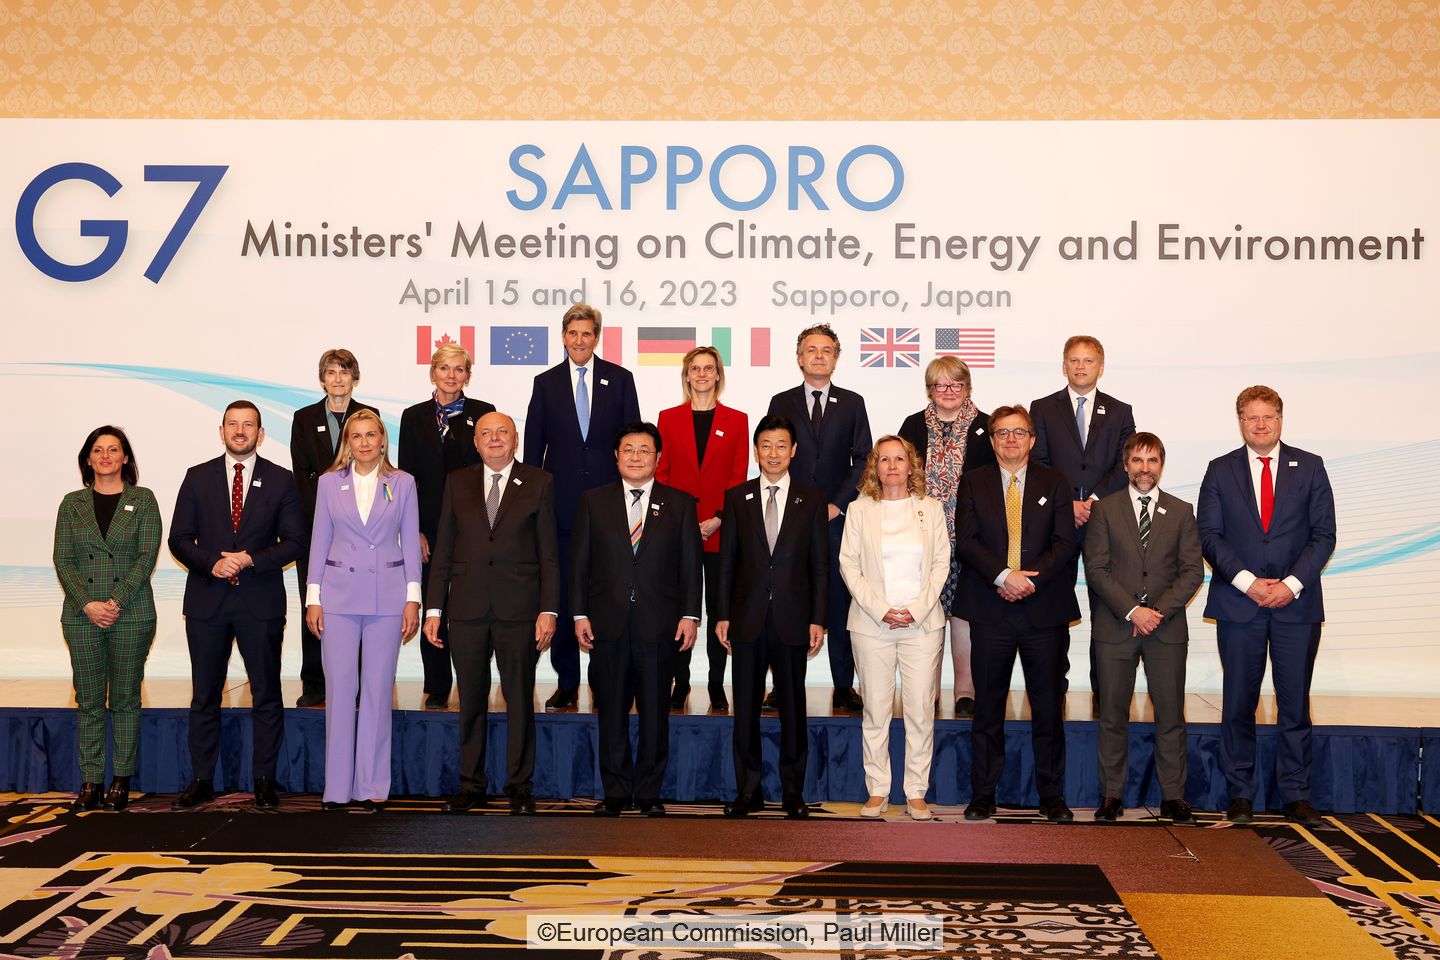 G7 environment minister meeting in Sapporo, Japan in April 2023